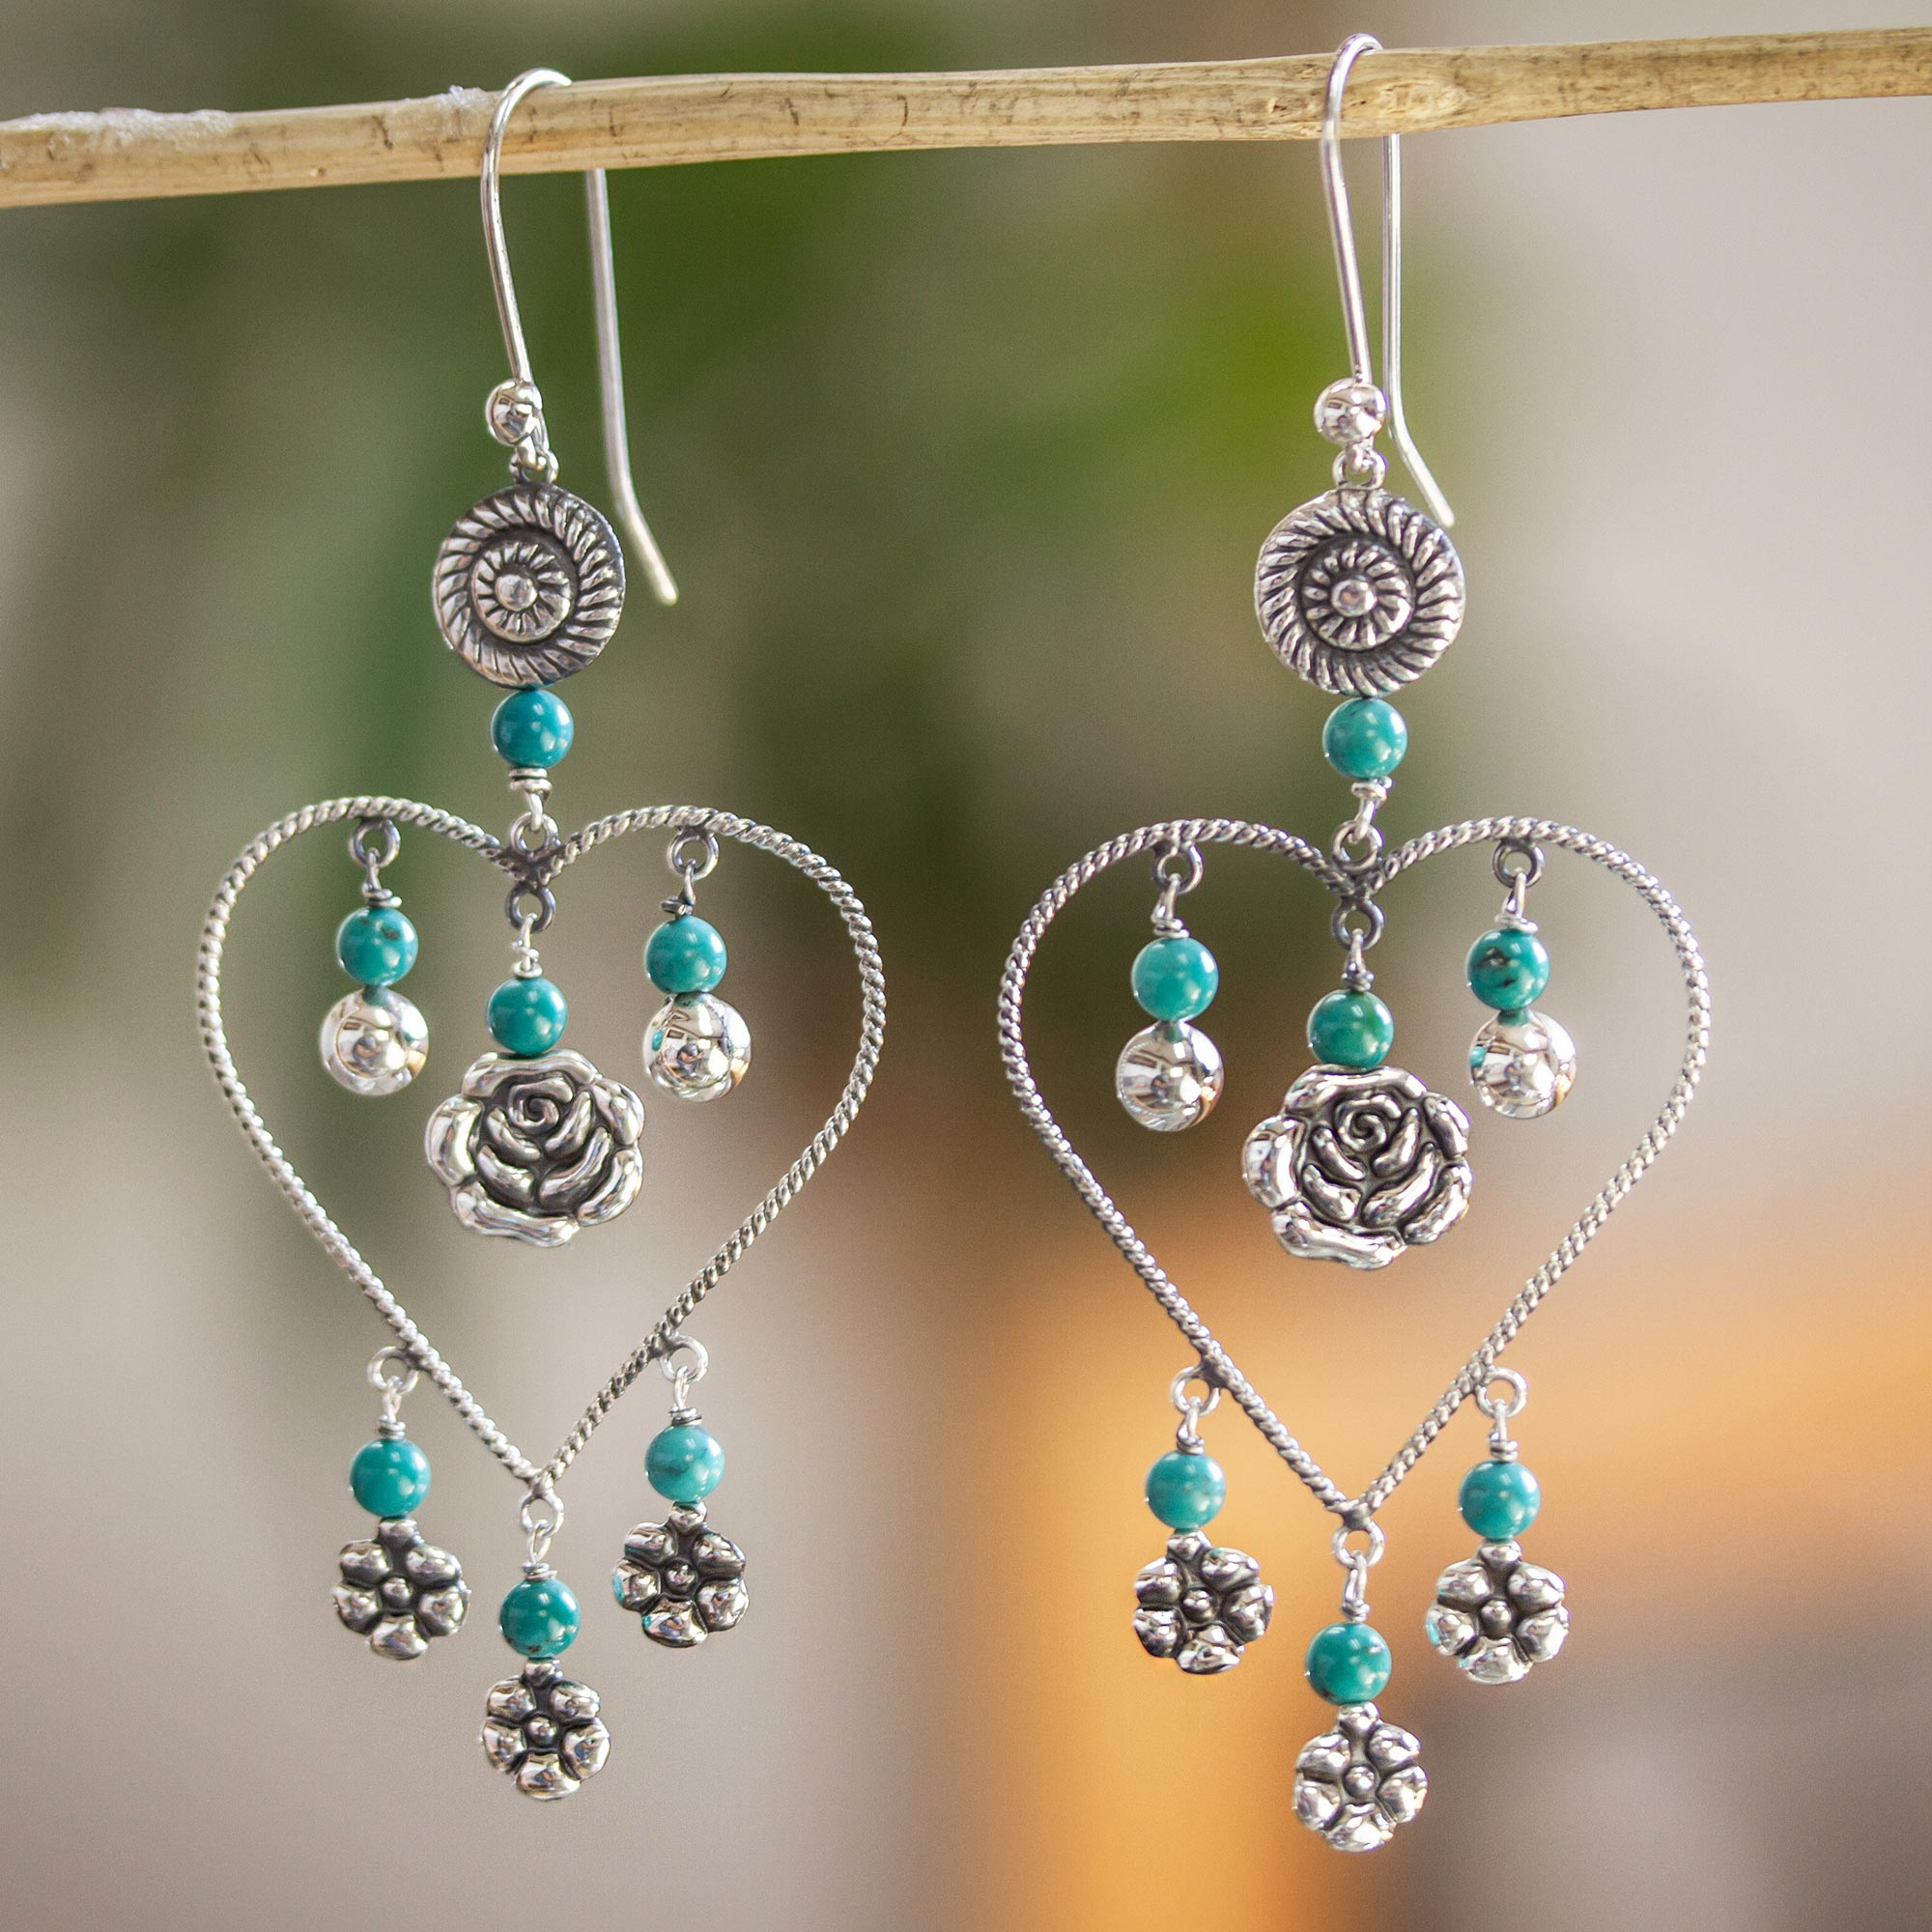 Turquoise Earrings in Sterling Silver with turquoise and red glass bead accents